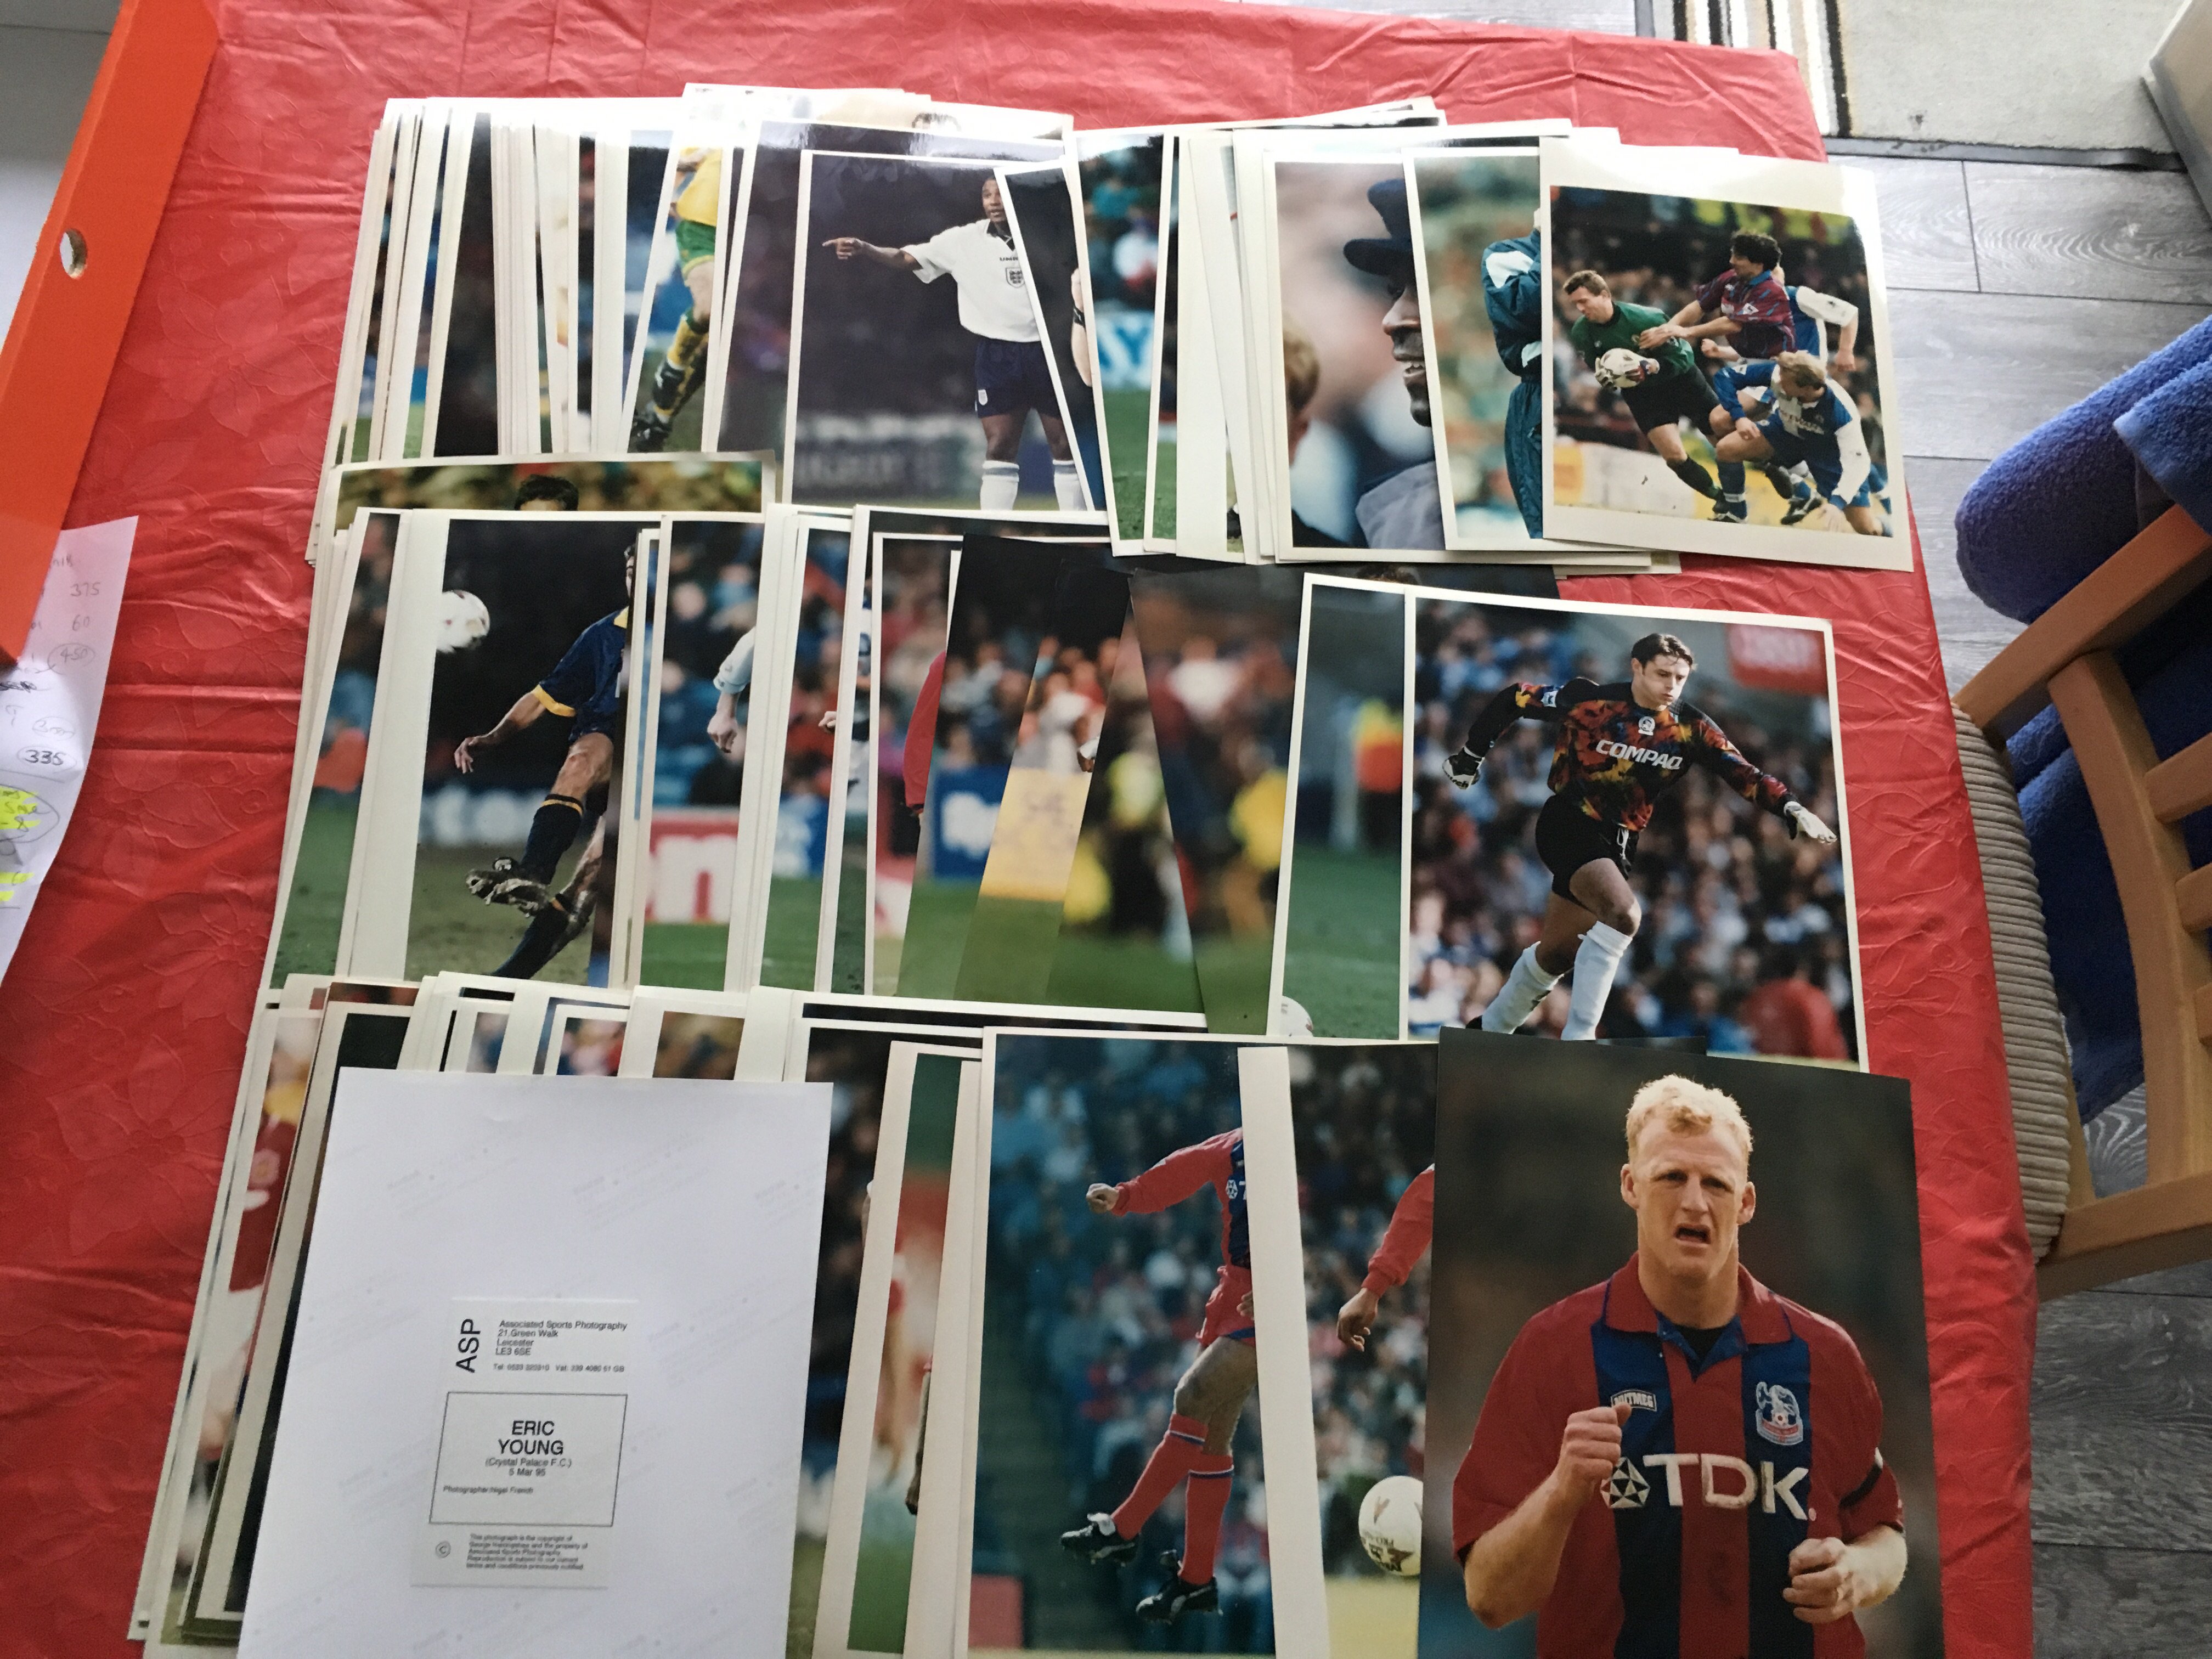 Football Press Photos: All 10 x 8 inch photos from the mid 1990s with stickers to rear stating press